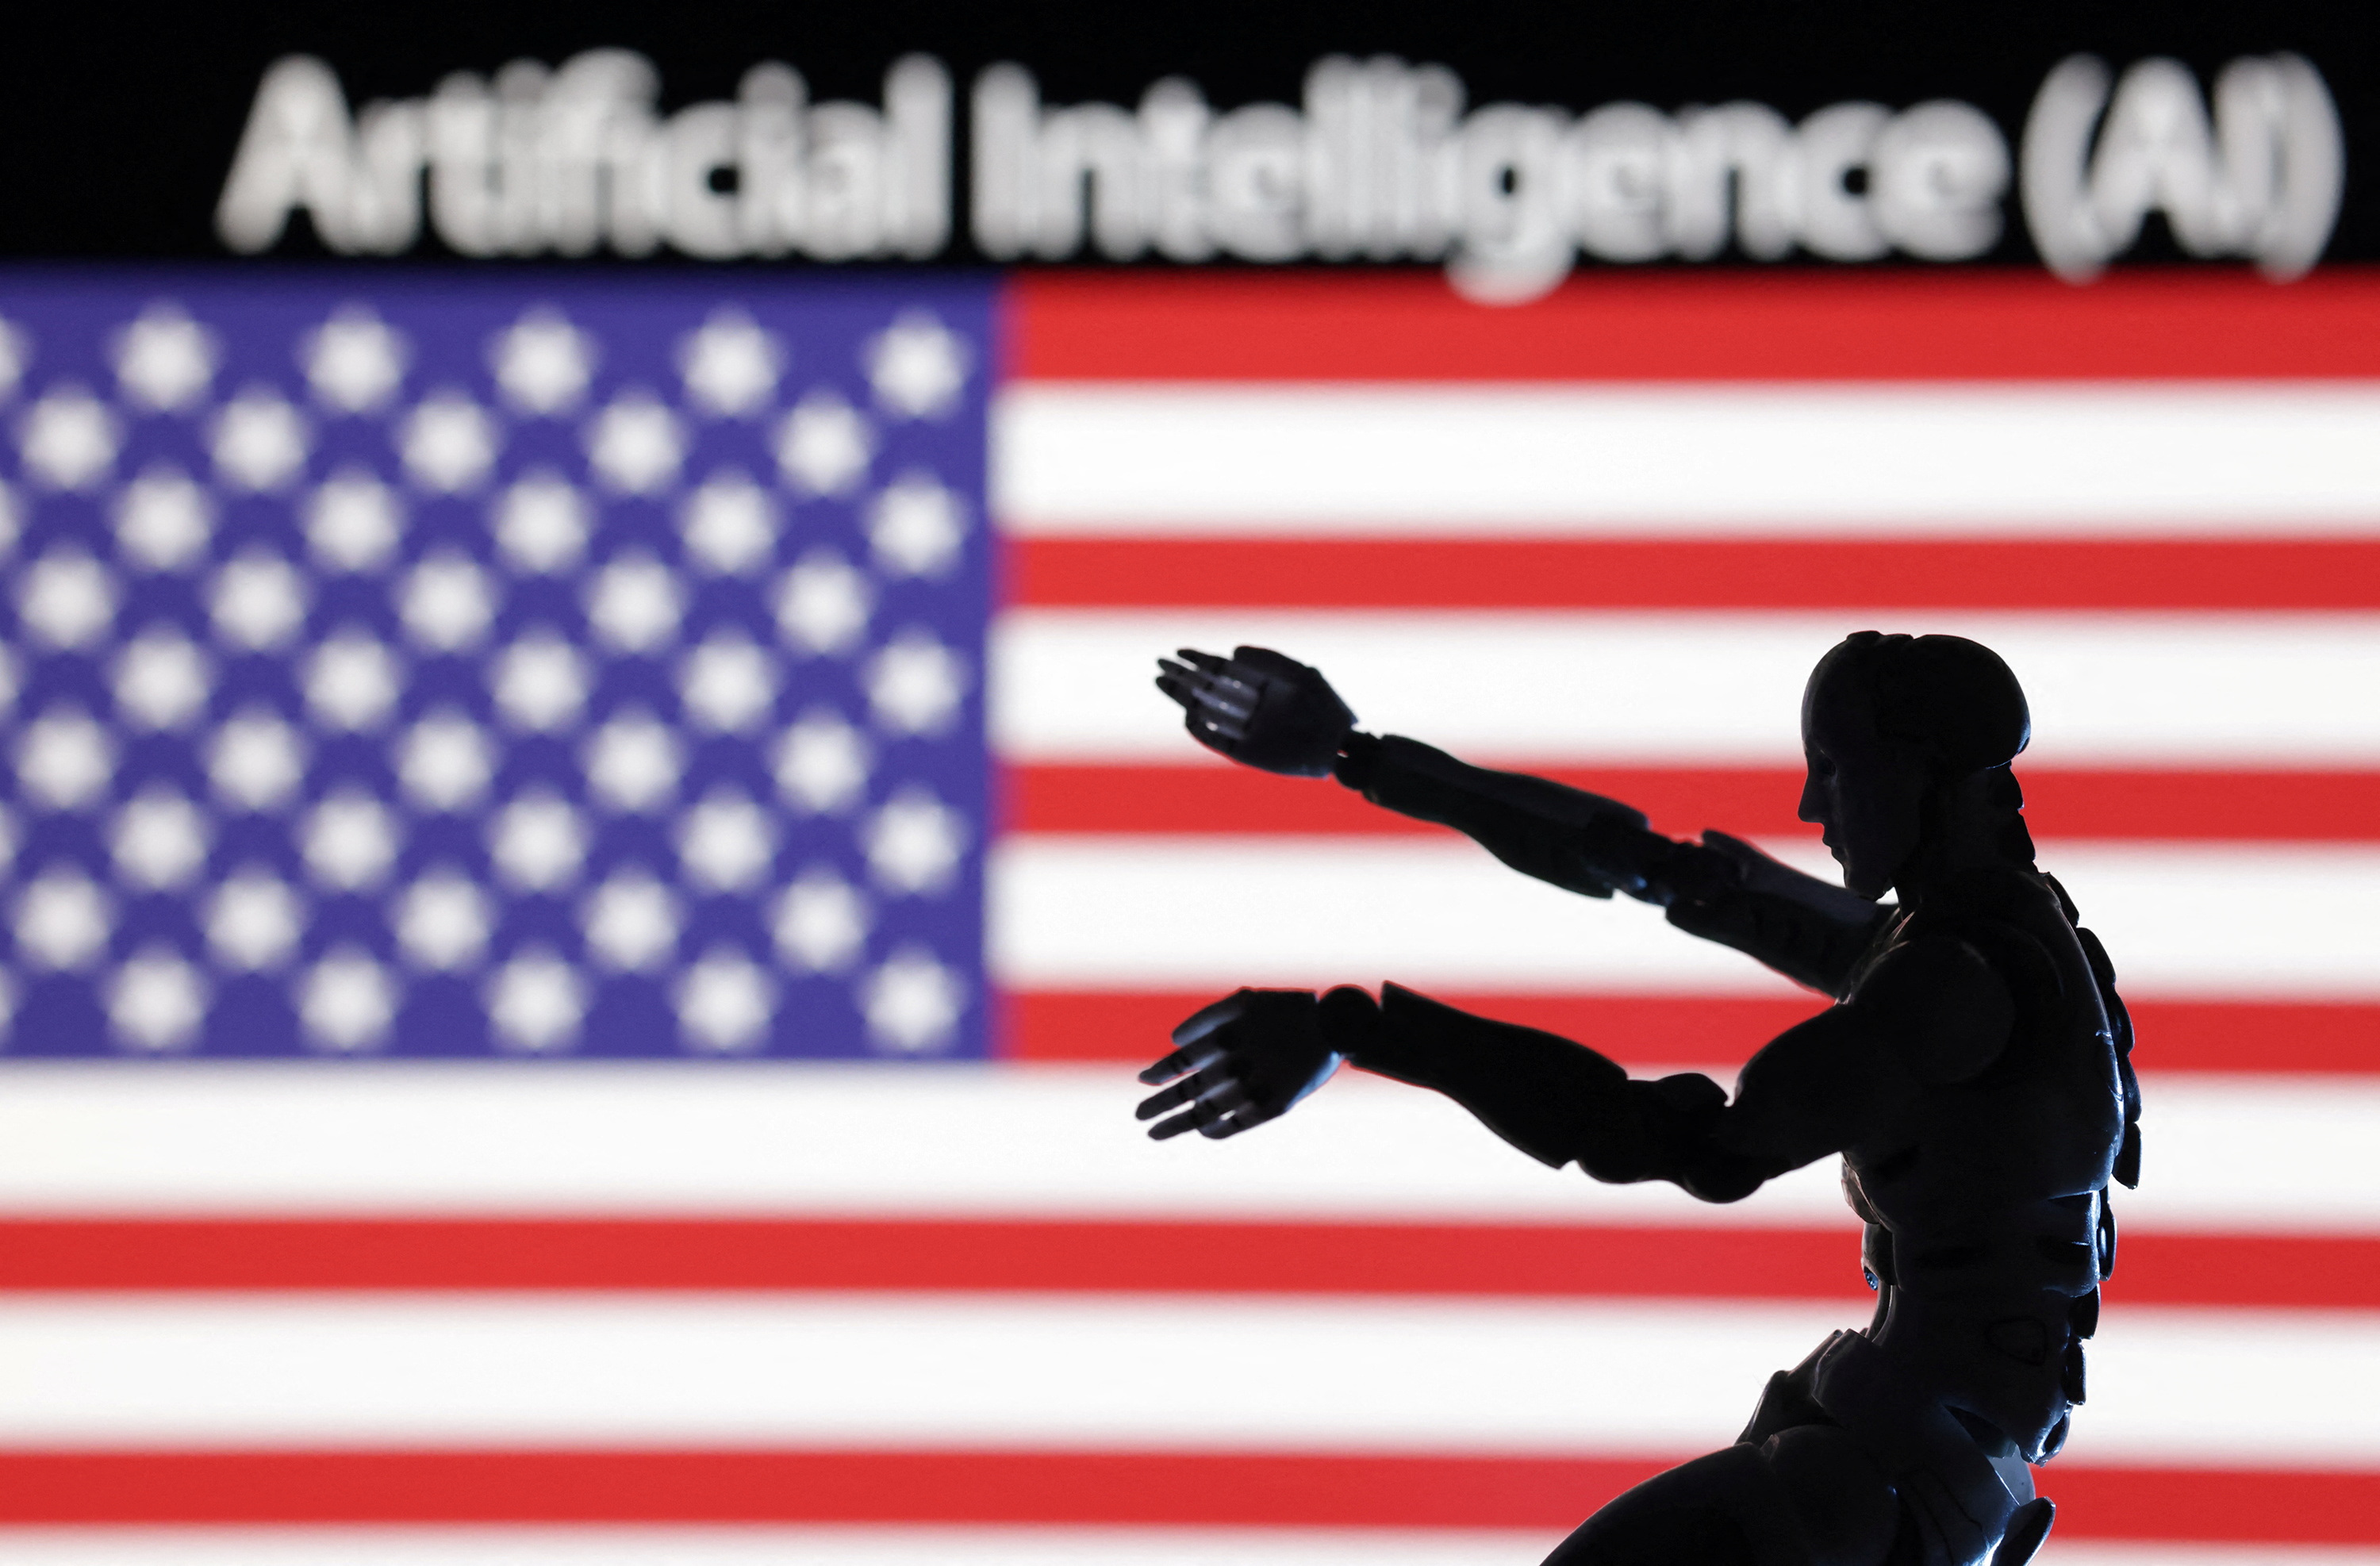 Illustration shows AI Artificial intelligence words, miniature of robot and U.S. flag